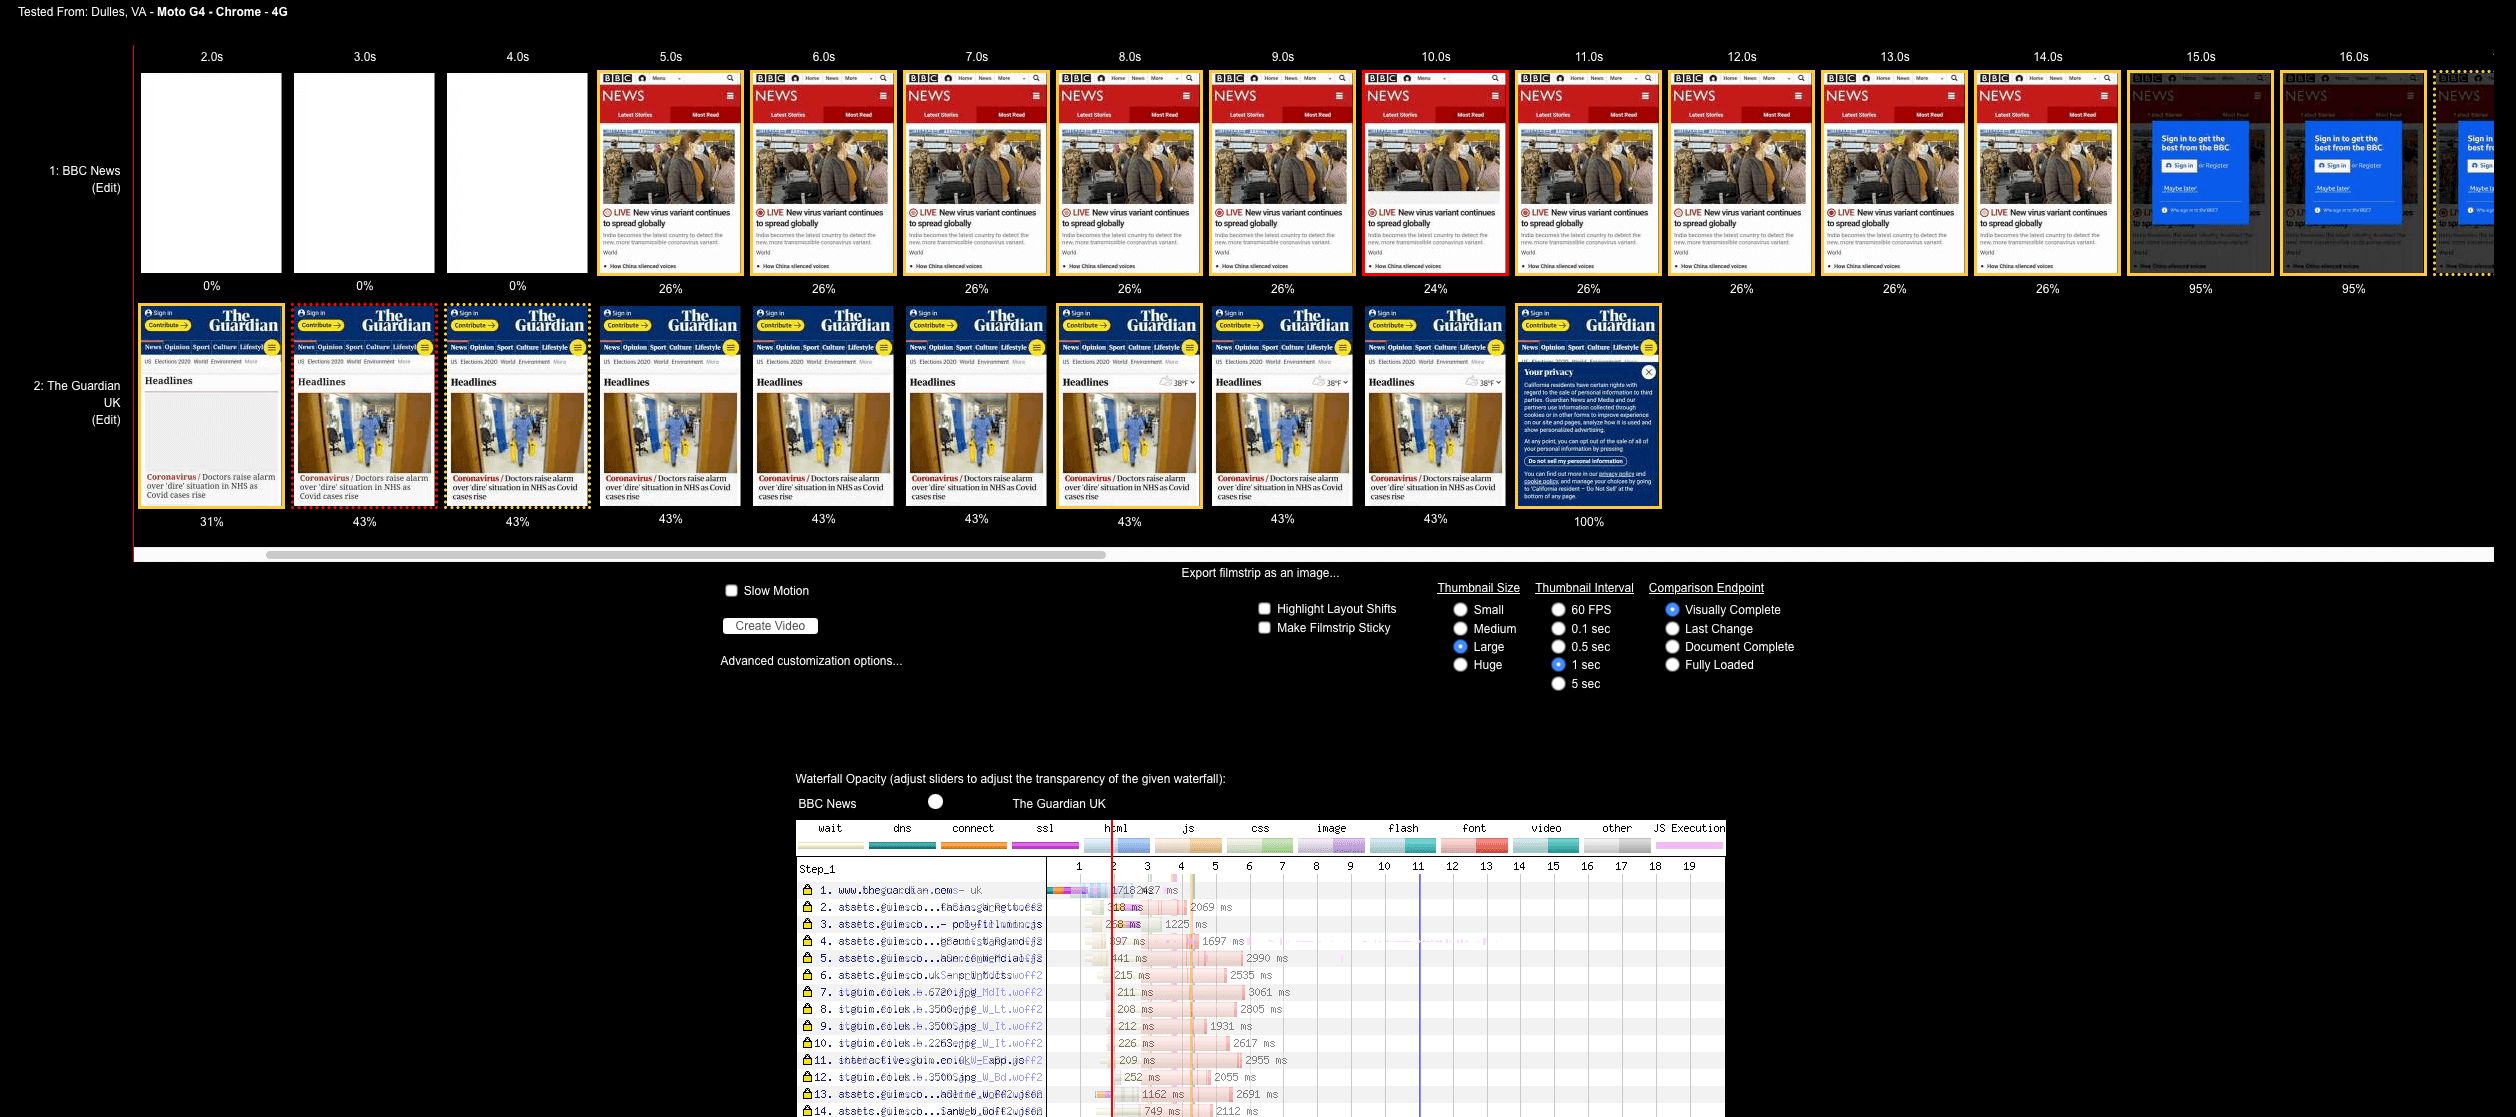 Visual comparison of the results on the standard compare view page.